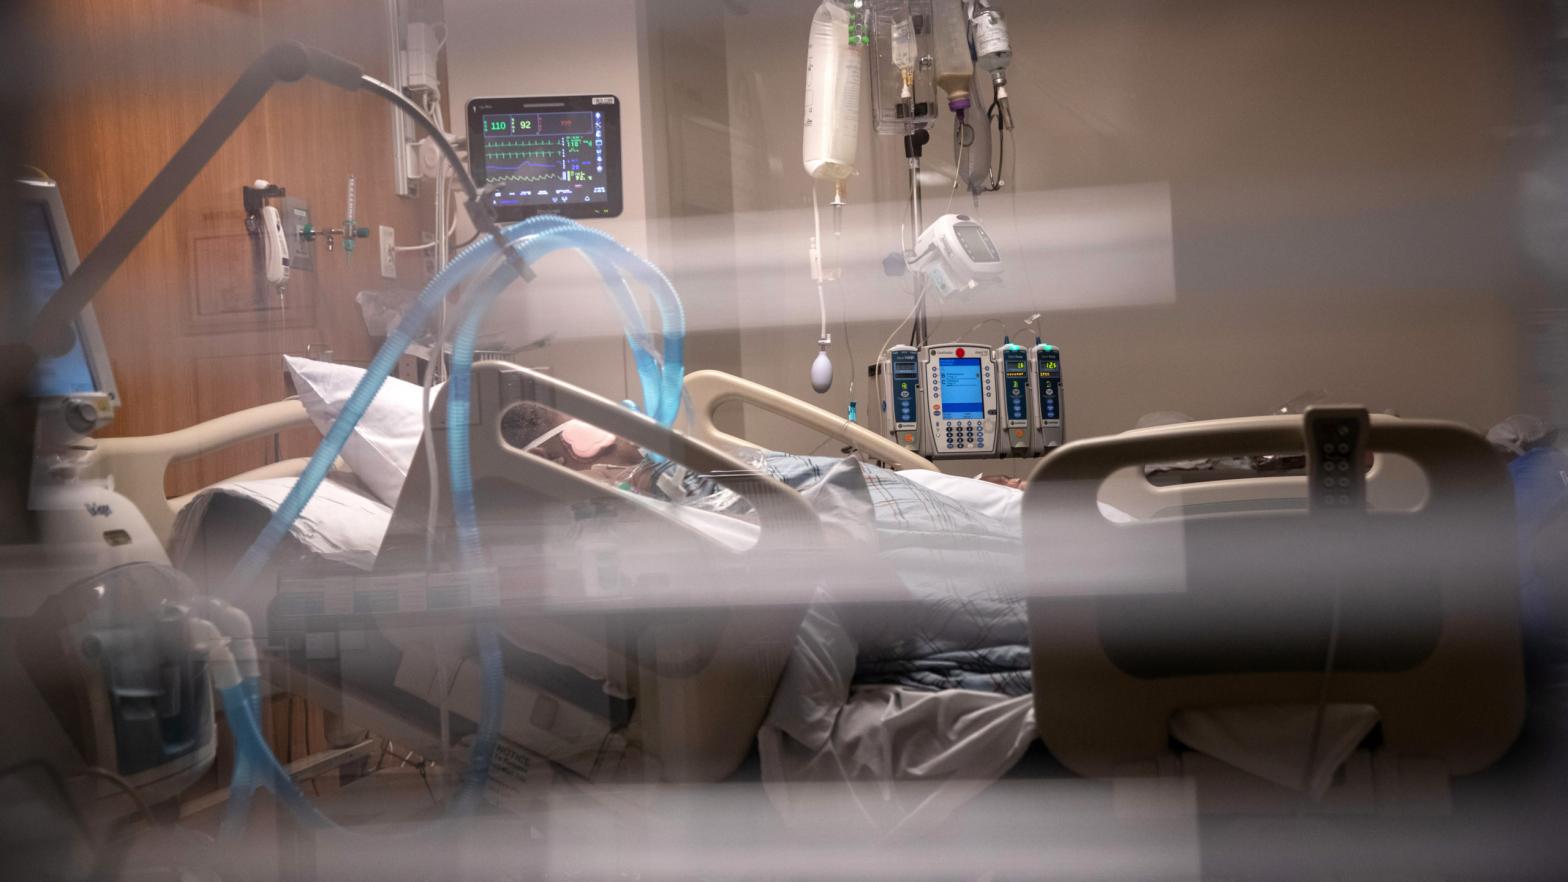 A patient on breathing tubes at Stamford Hospital Intensive Care Unit in Connecticut in April 2020. (Photo: John Moore, Getty Images)